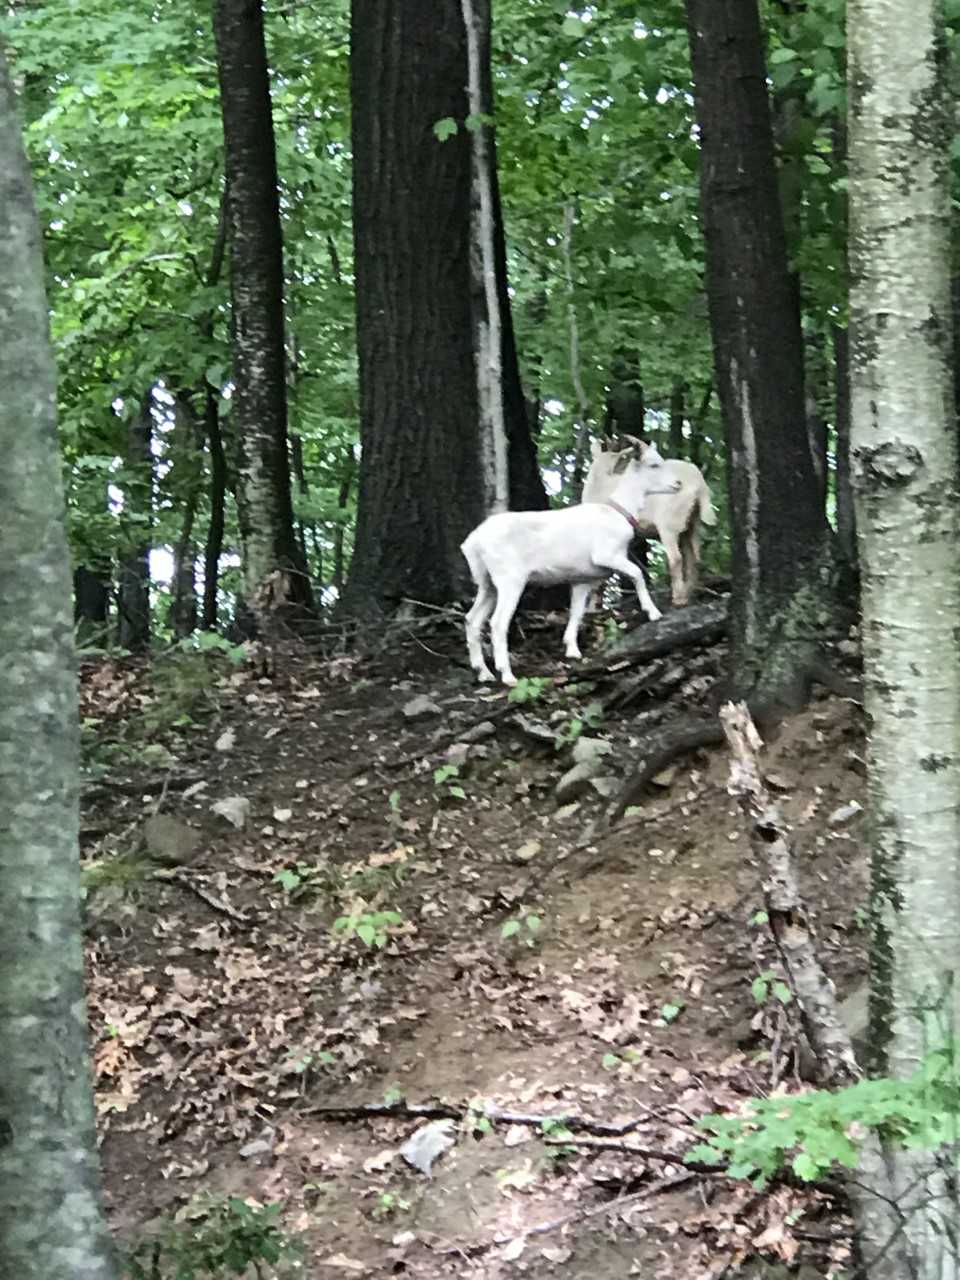 Goats on the Loose in Ramapo